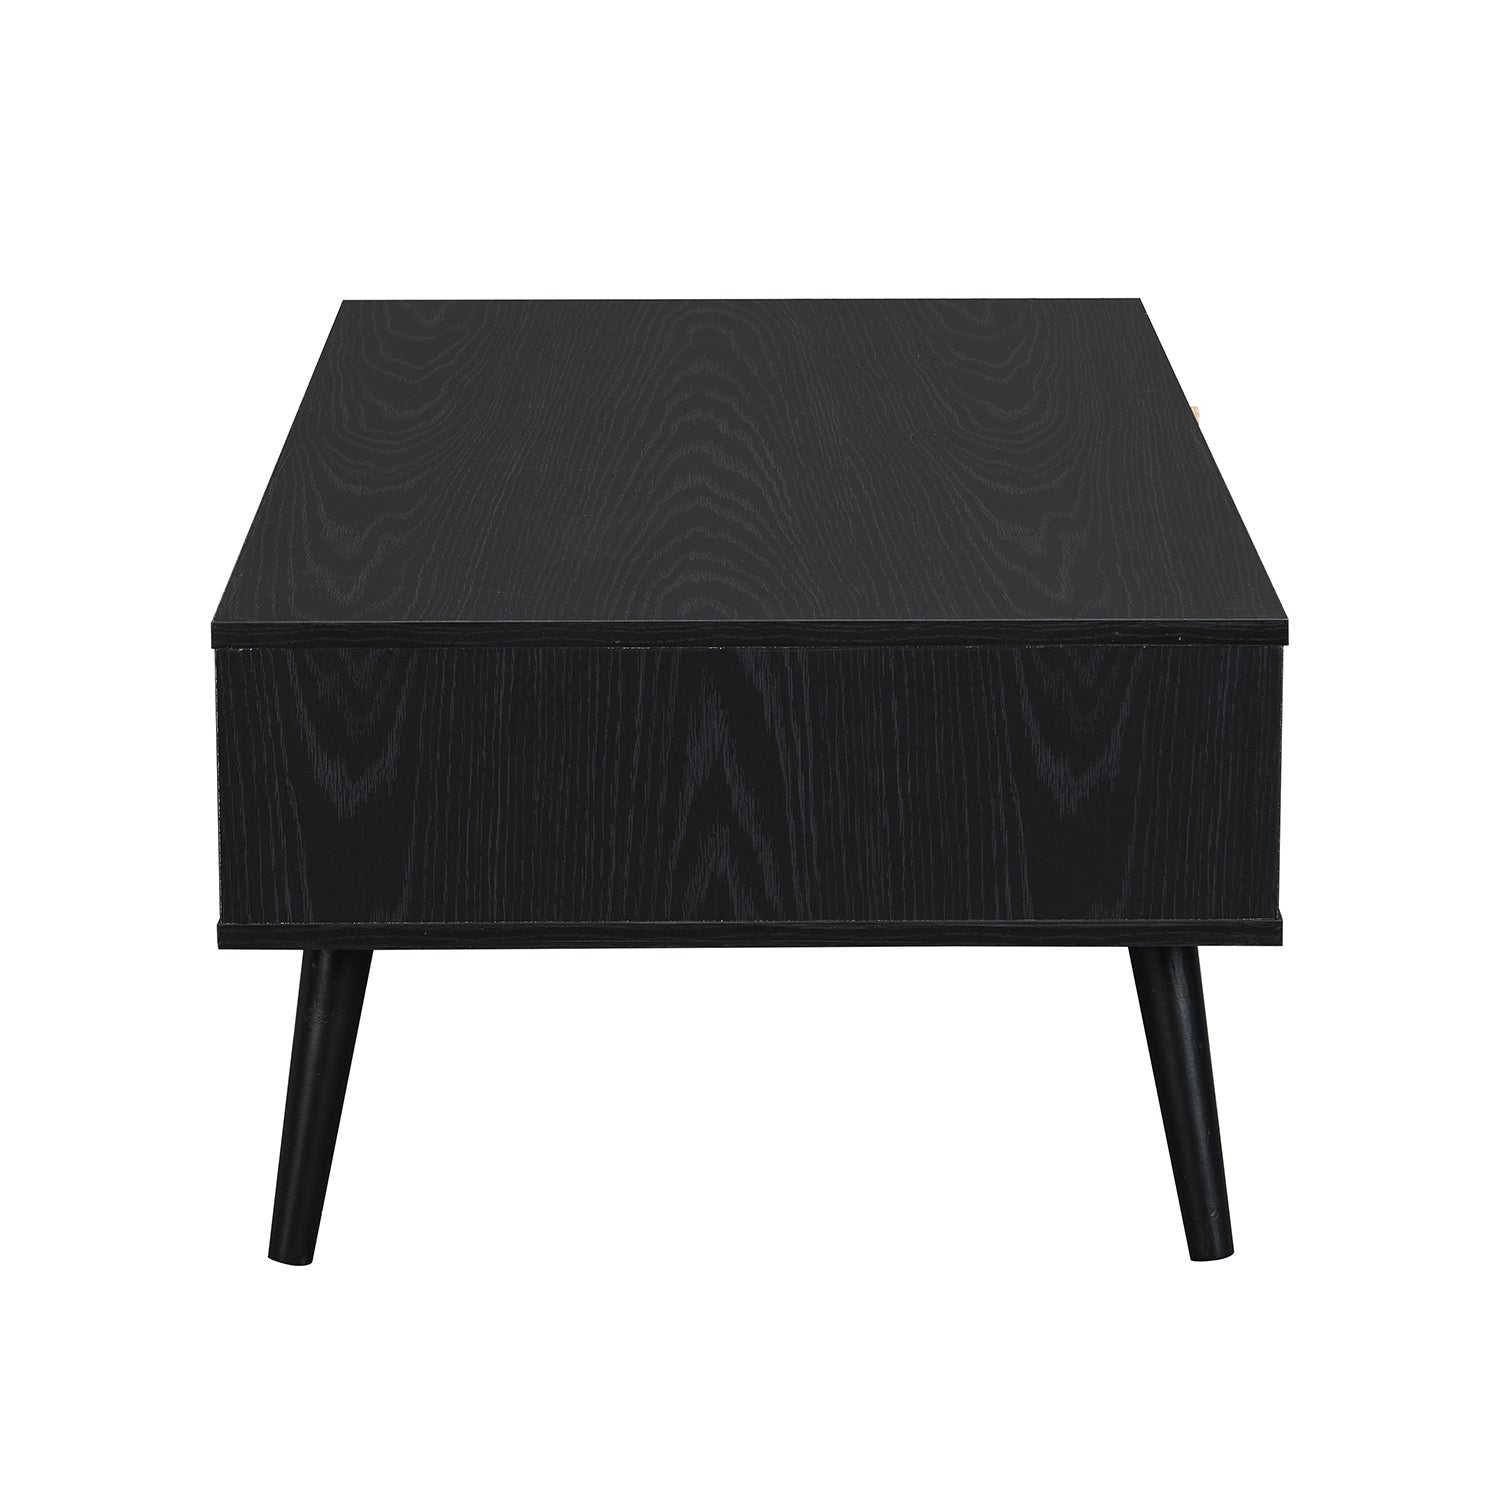 Frances Woven Rattan Wooden Coffee Table in Black Colour